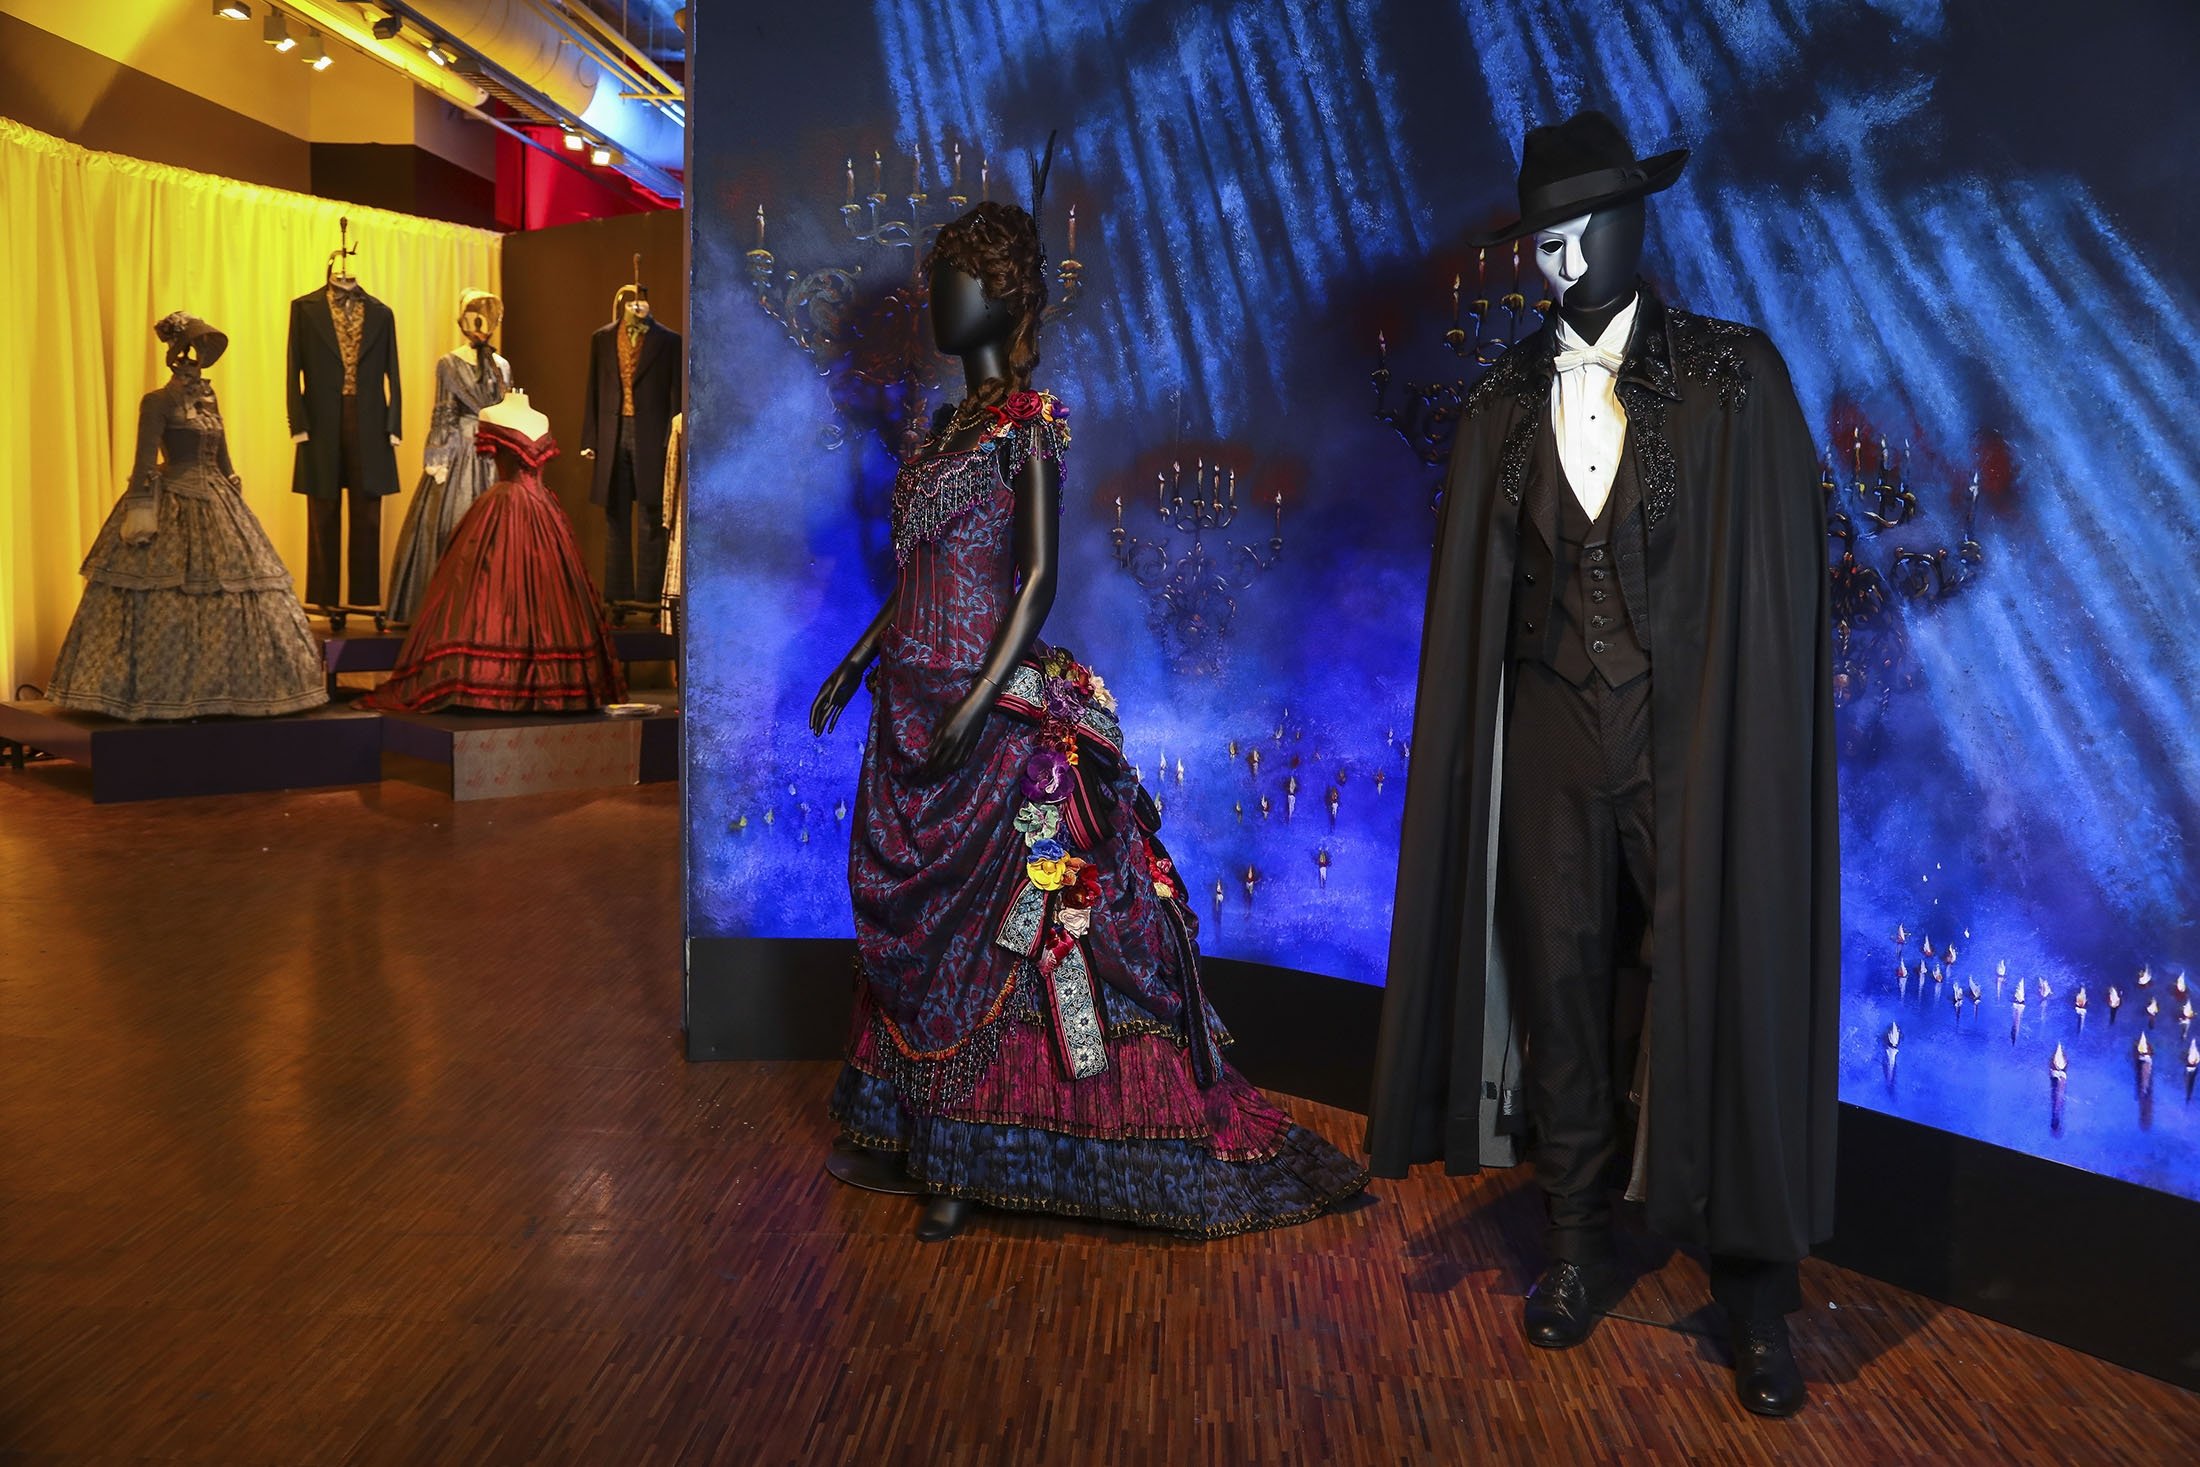 Costumes from the Broadway musical "The Phantom of the Opera" are displayed at the "Showstoppers! Spectacular Costumes from Stage & Screen" exhibit in Times Square, New York, U.S., Aug. 2, 2021. (AP Photo)